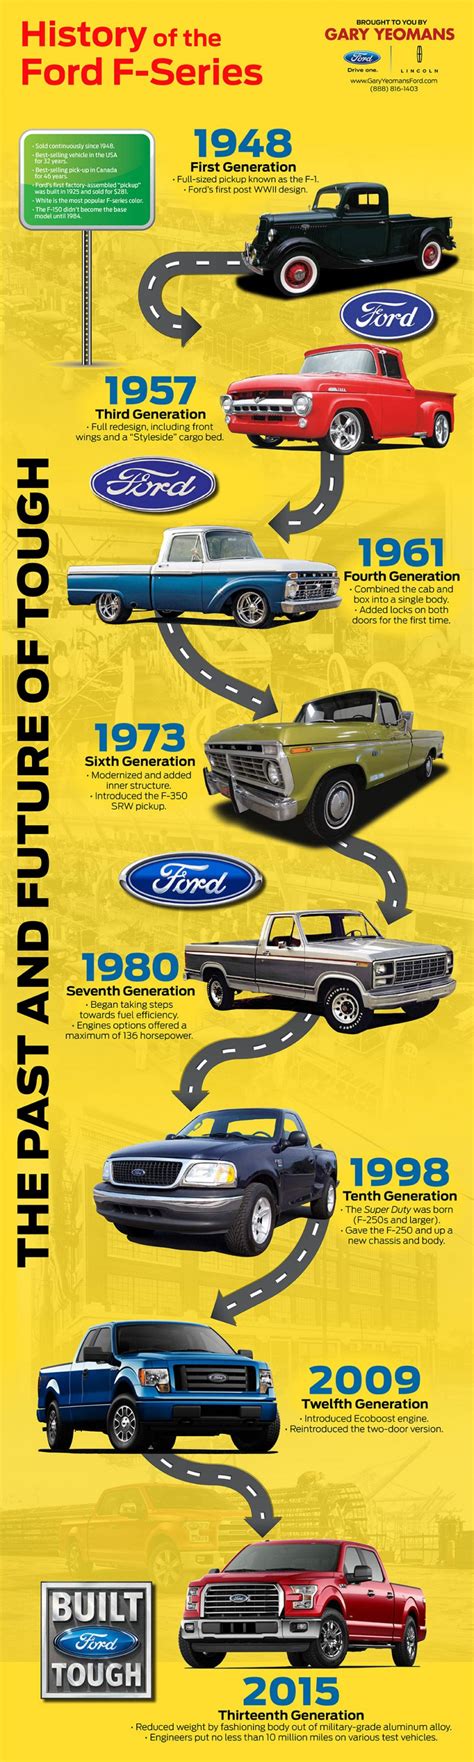 History Of The Ford F Series Infographic Only Infographic